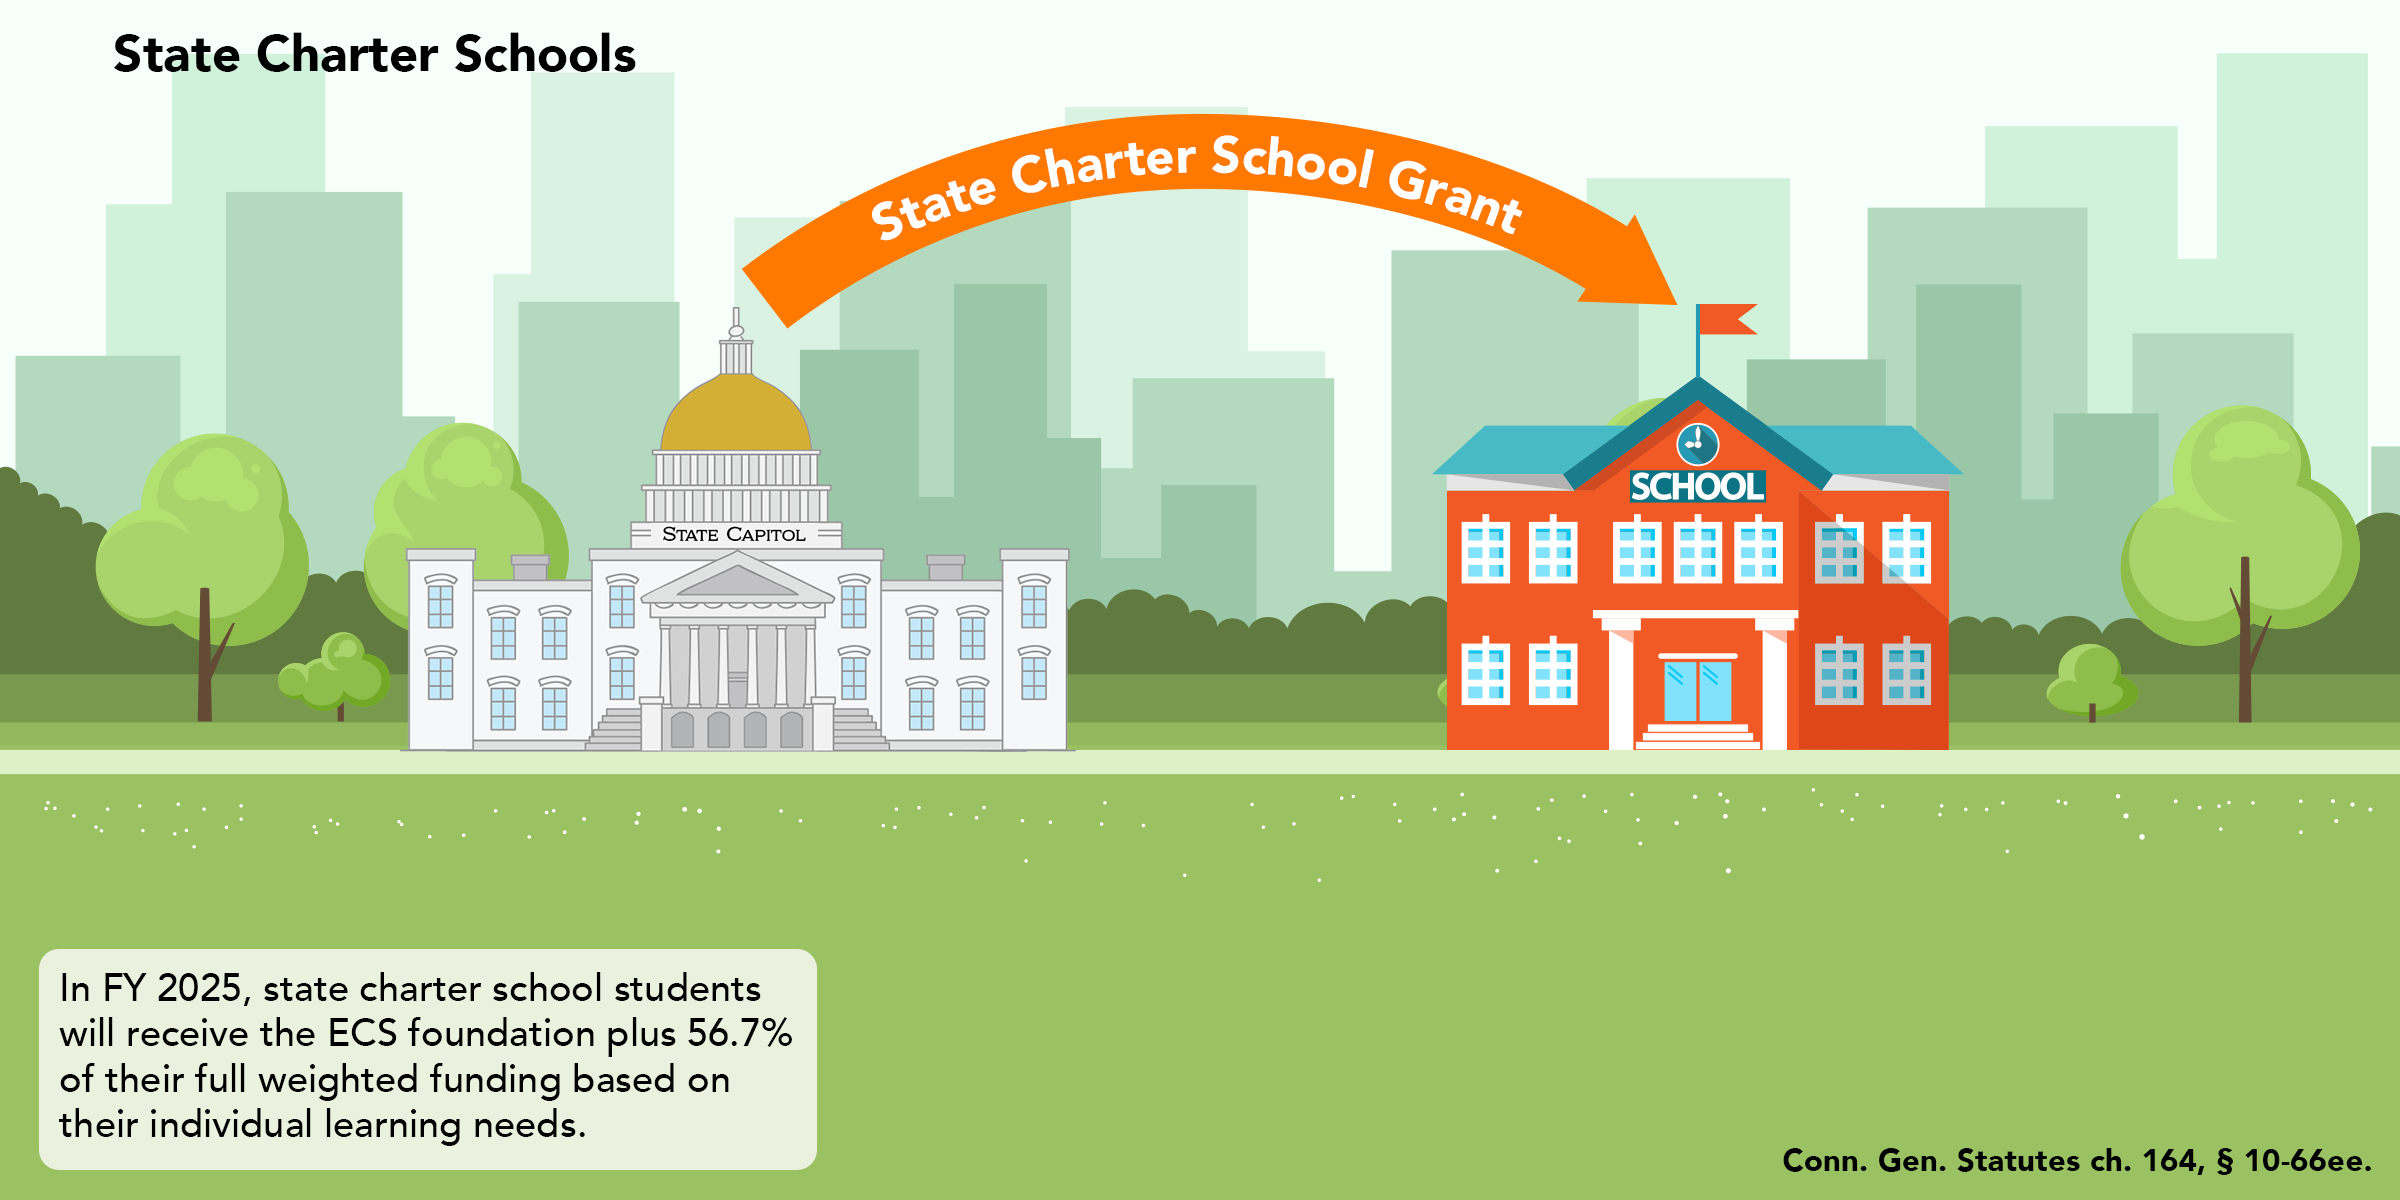 Funding formula diagram for state charters schools